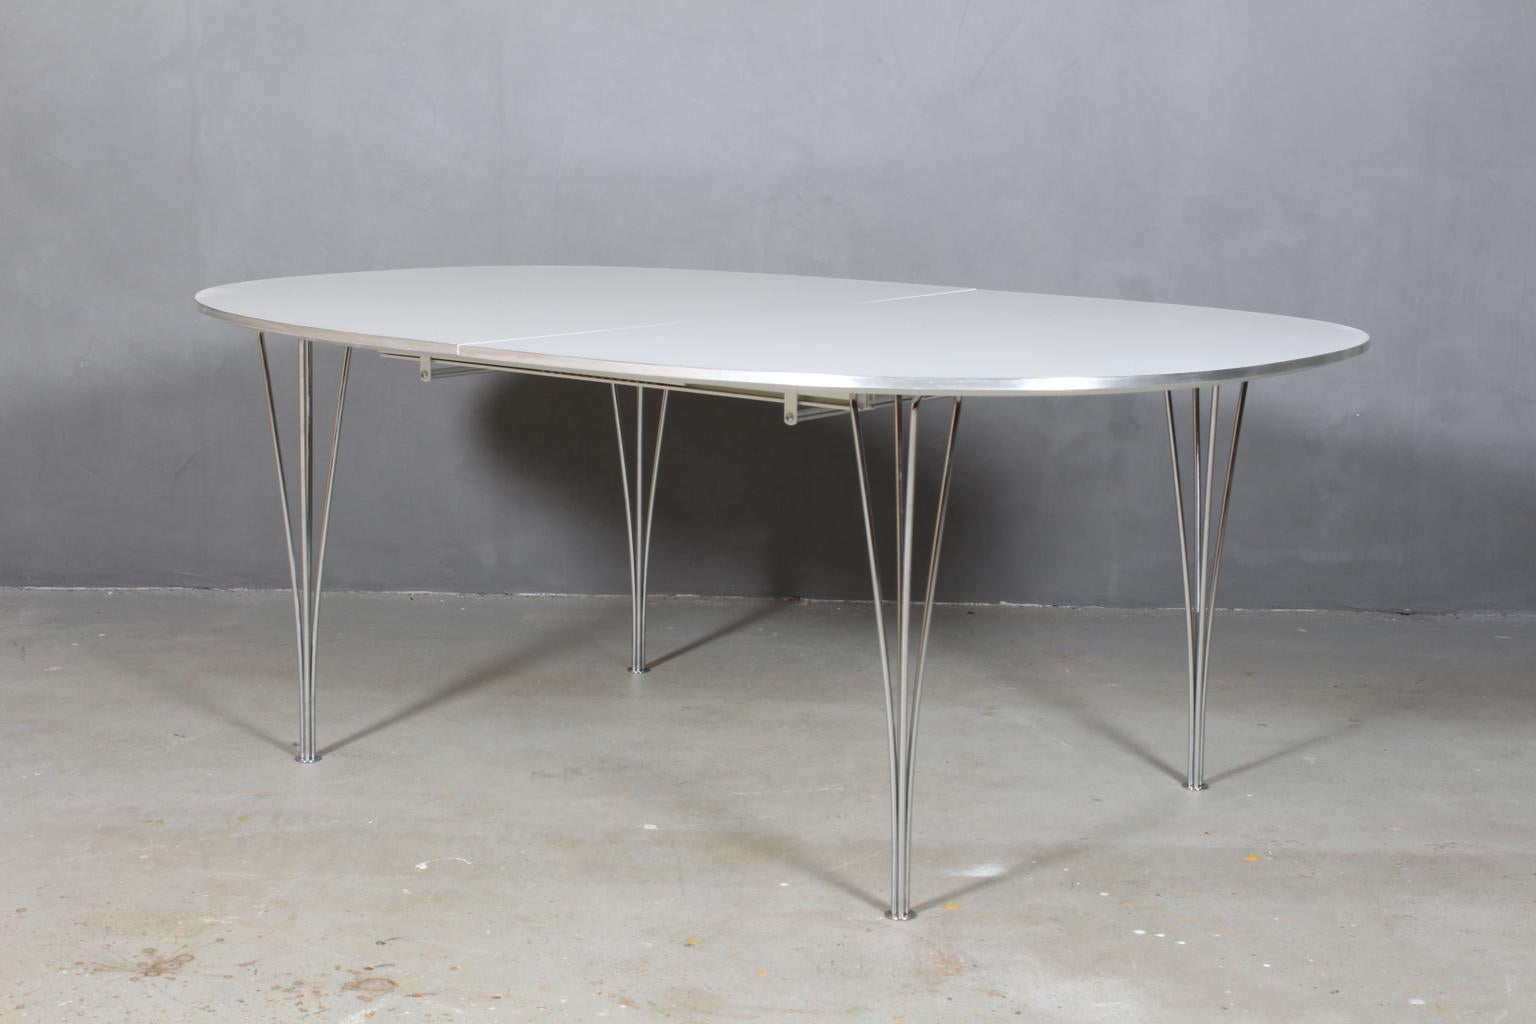 Piet Hein & Bruno Mathsson dining table with new professional lacquered white plate. With aluminium side.

Two Extension leaf of 60 cms.

Legs of chromed metal.

Model Super Elipse, made by Fritz Hansen.

This is one of the most iconic tables in